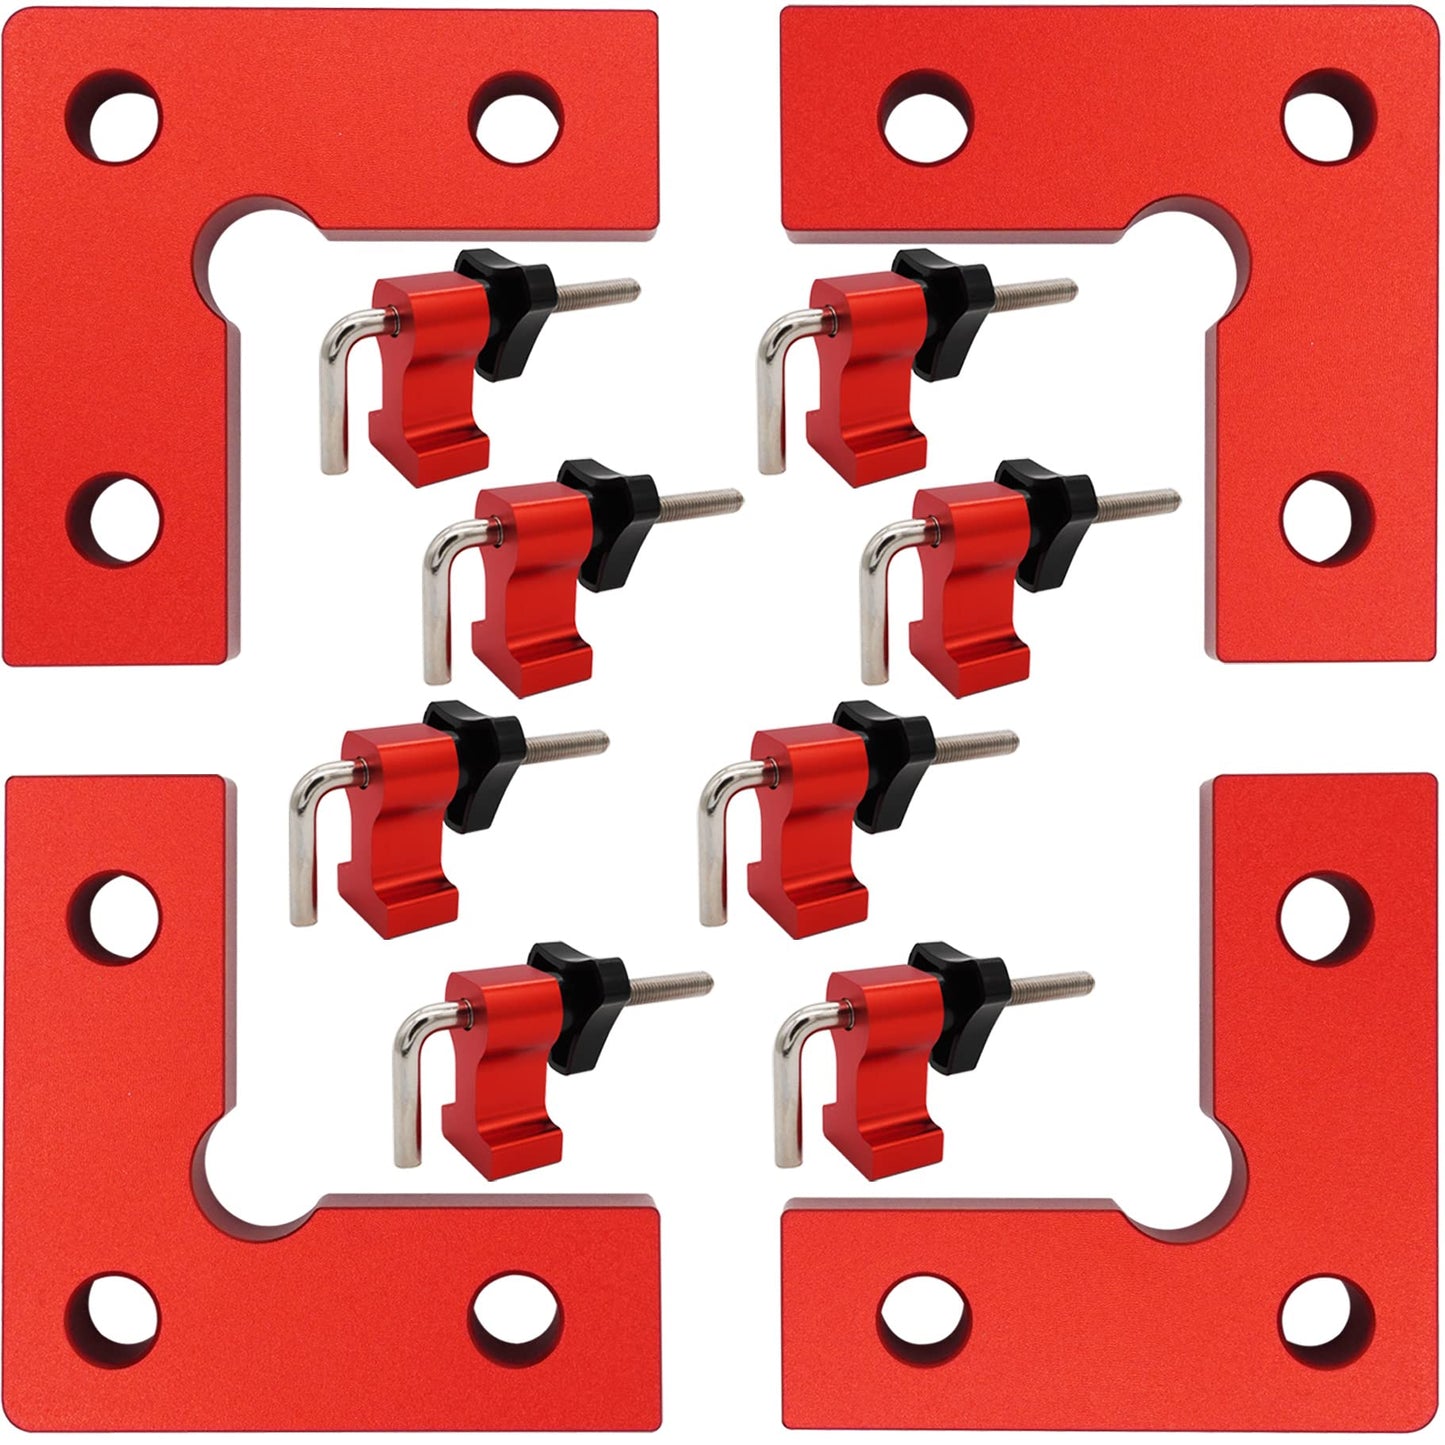 4-Pack Corner Clamps 90 Degree, 2.32"x2.32" Mini Aluminum Alloy Right Angle Clamps, Woodworking Positioning Squares for Cabinets, Drawers, Tables,